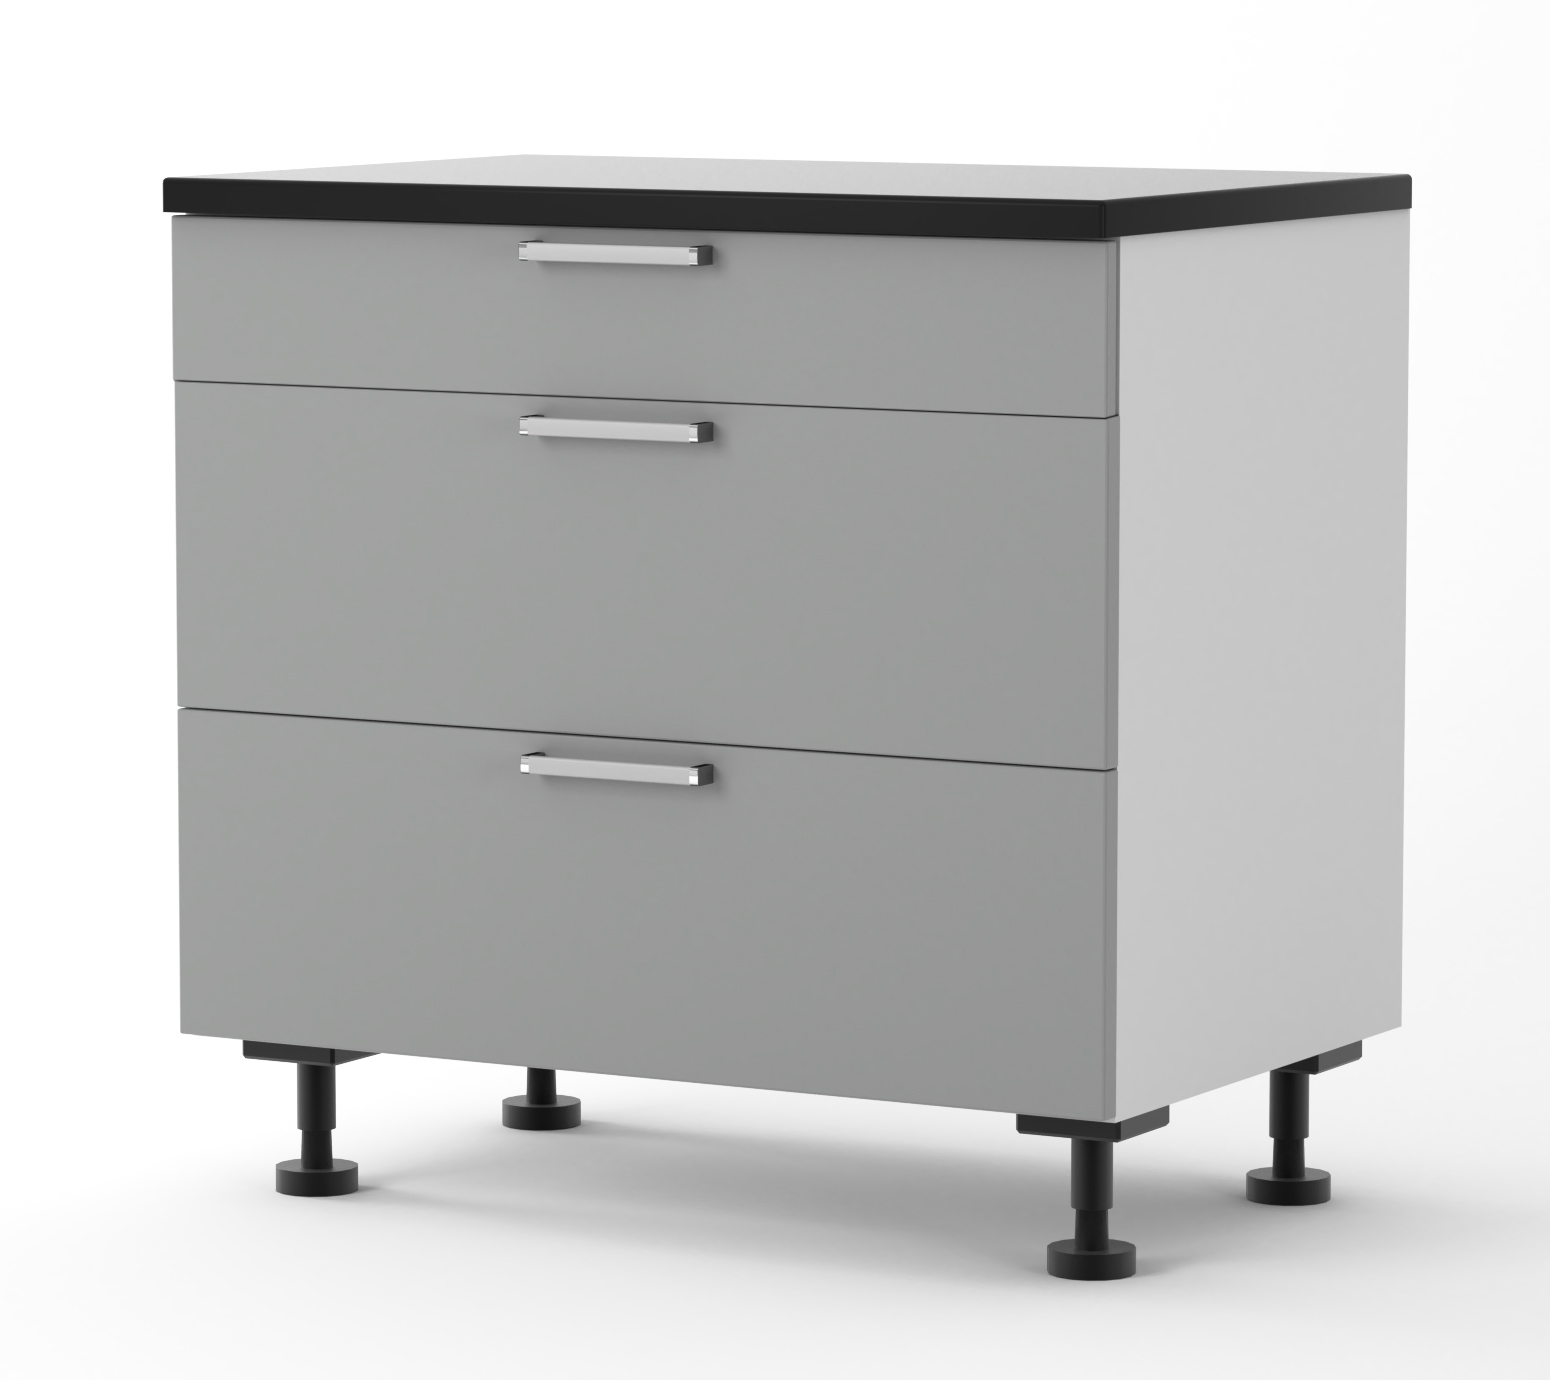 Athens - 900mm wide Three Drawer Base Cabinet